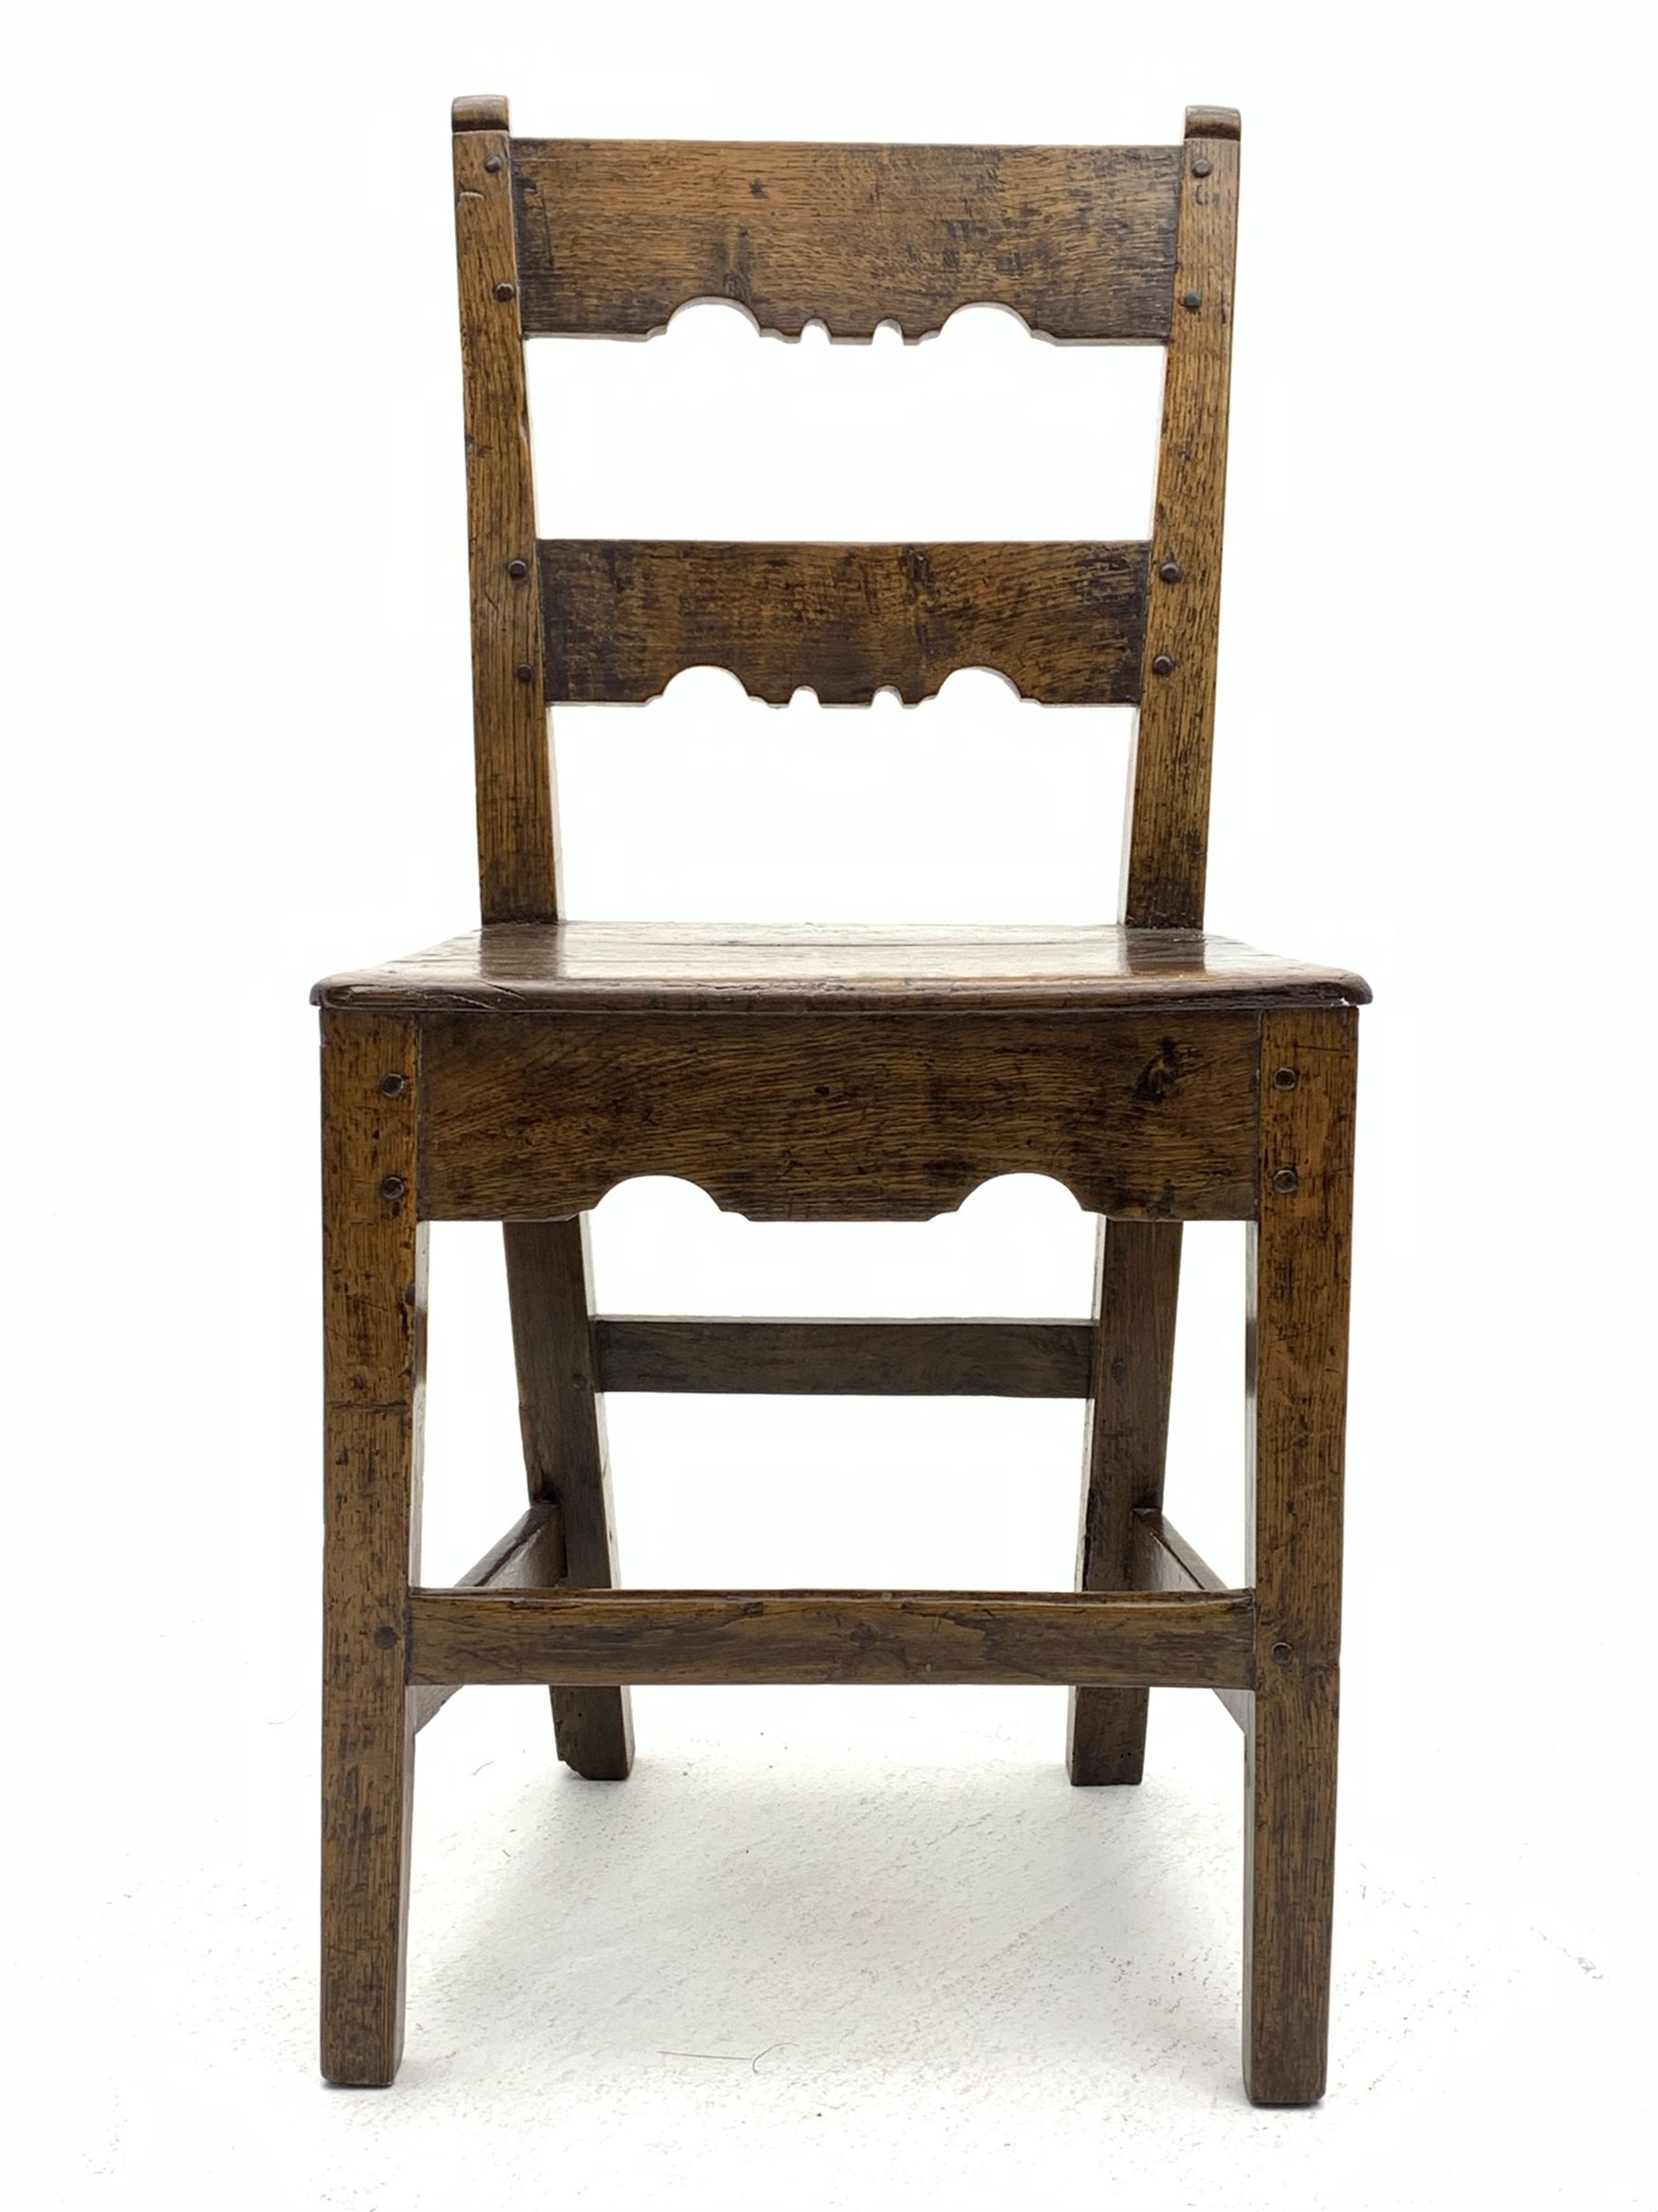 18th century oak chair - Image 2 of 3